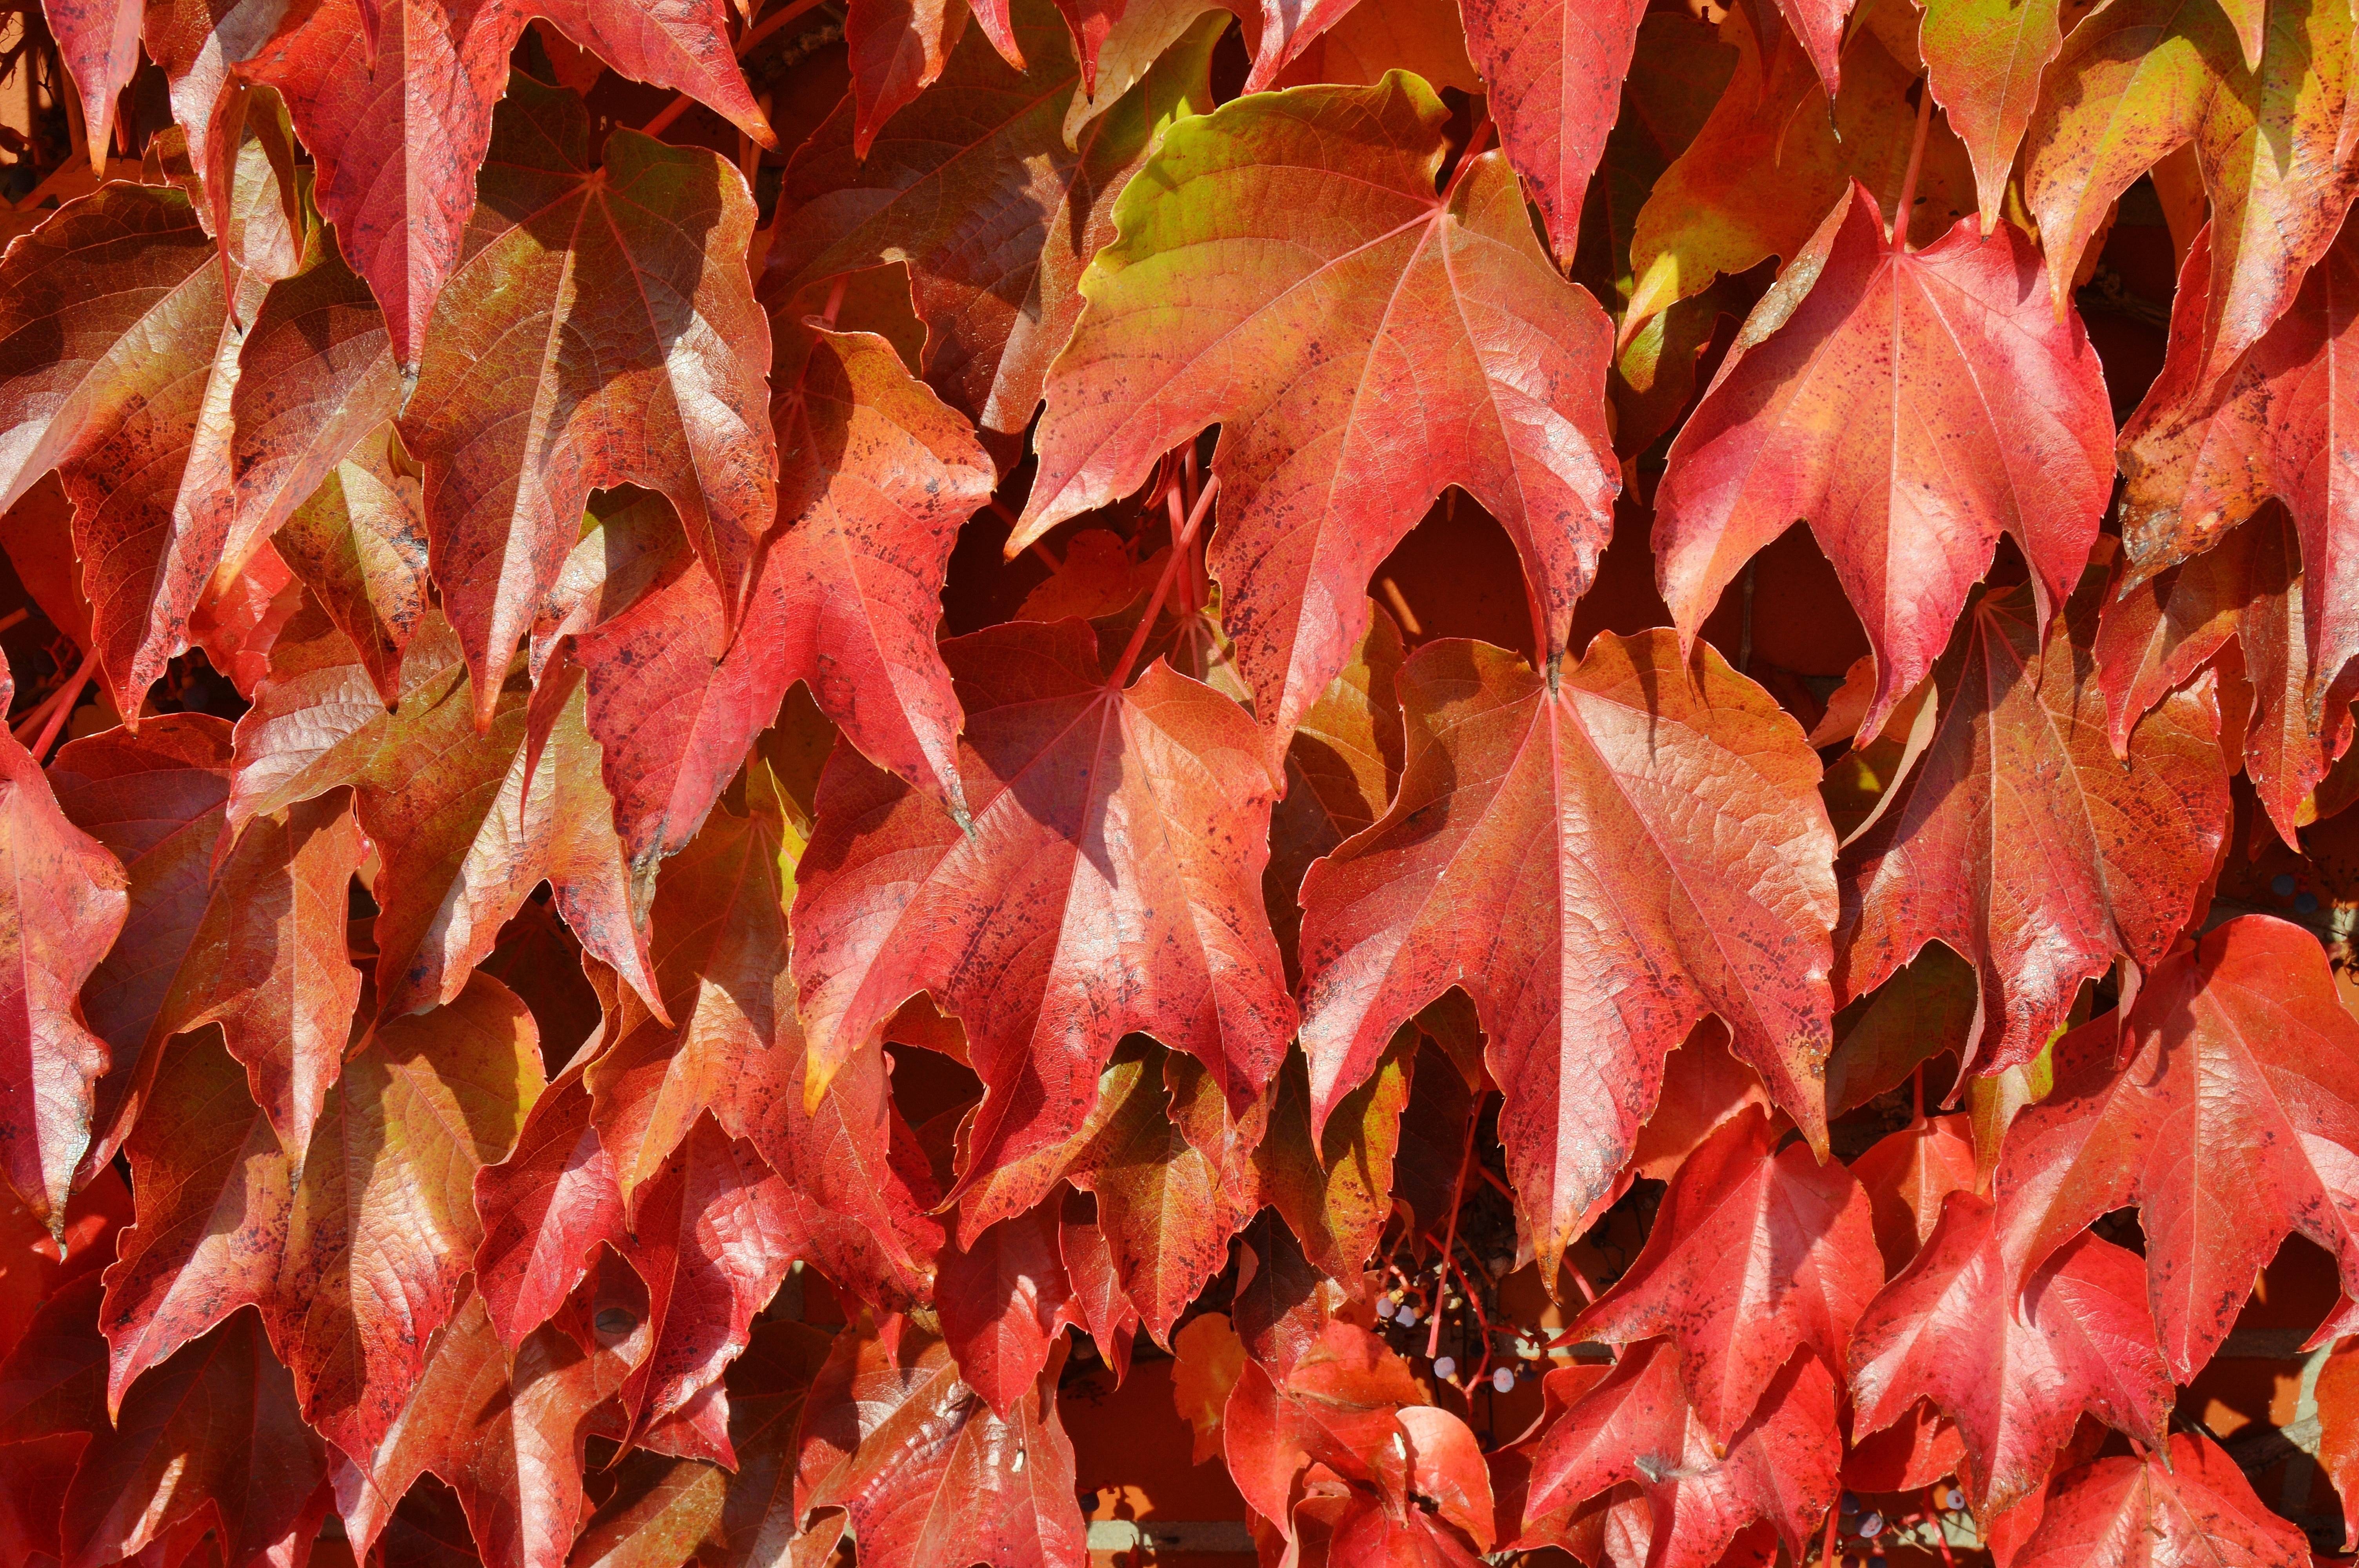 red and orange leaves